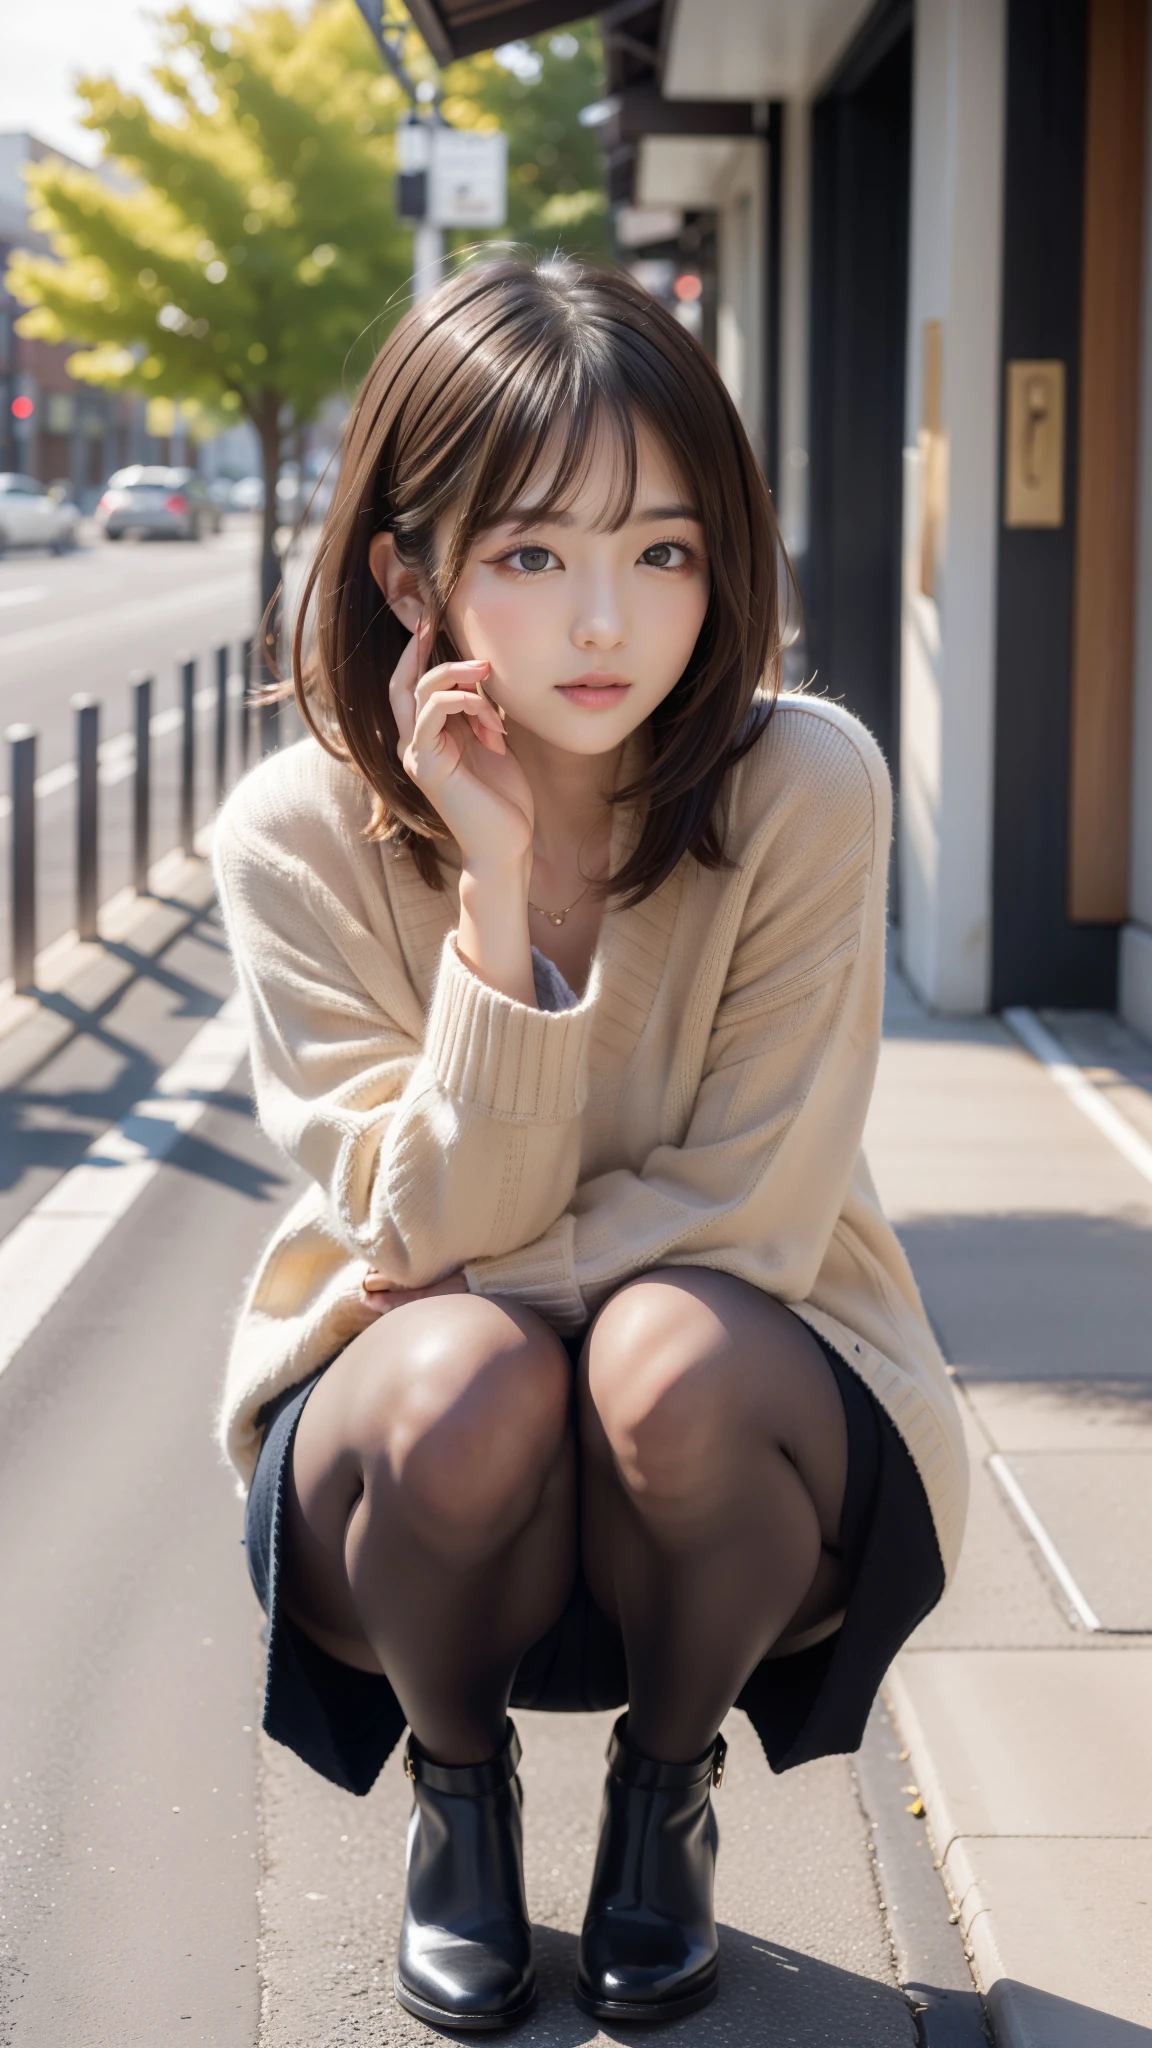 Photo taken by a professional photographer，Close-up of a woman squatting on the sidewalk with her legs crossed, kiko mizuhara, wearing a sweater, Shirahime cut brown hair, wearing a sweater, young and cute girl, japanese model, 白いwearing a sweater, Chiho, ランダムカラーのカジュアルなwearing a sweater,Cute ide waves with short hair, a cute young woman, cute young woman, black pantyhose，black tights，black high heels，